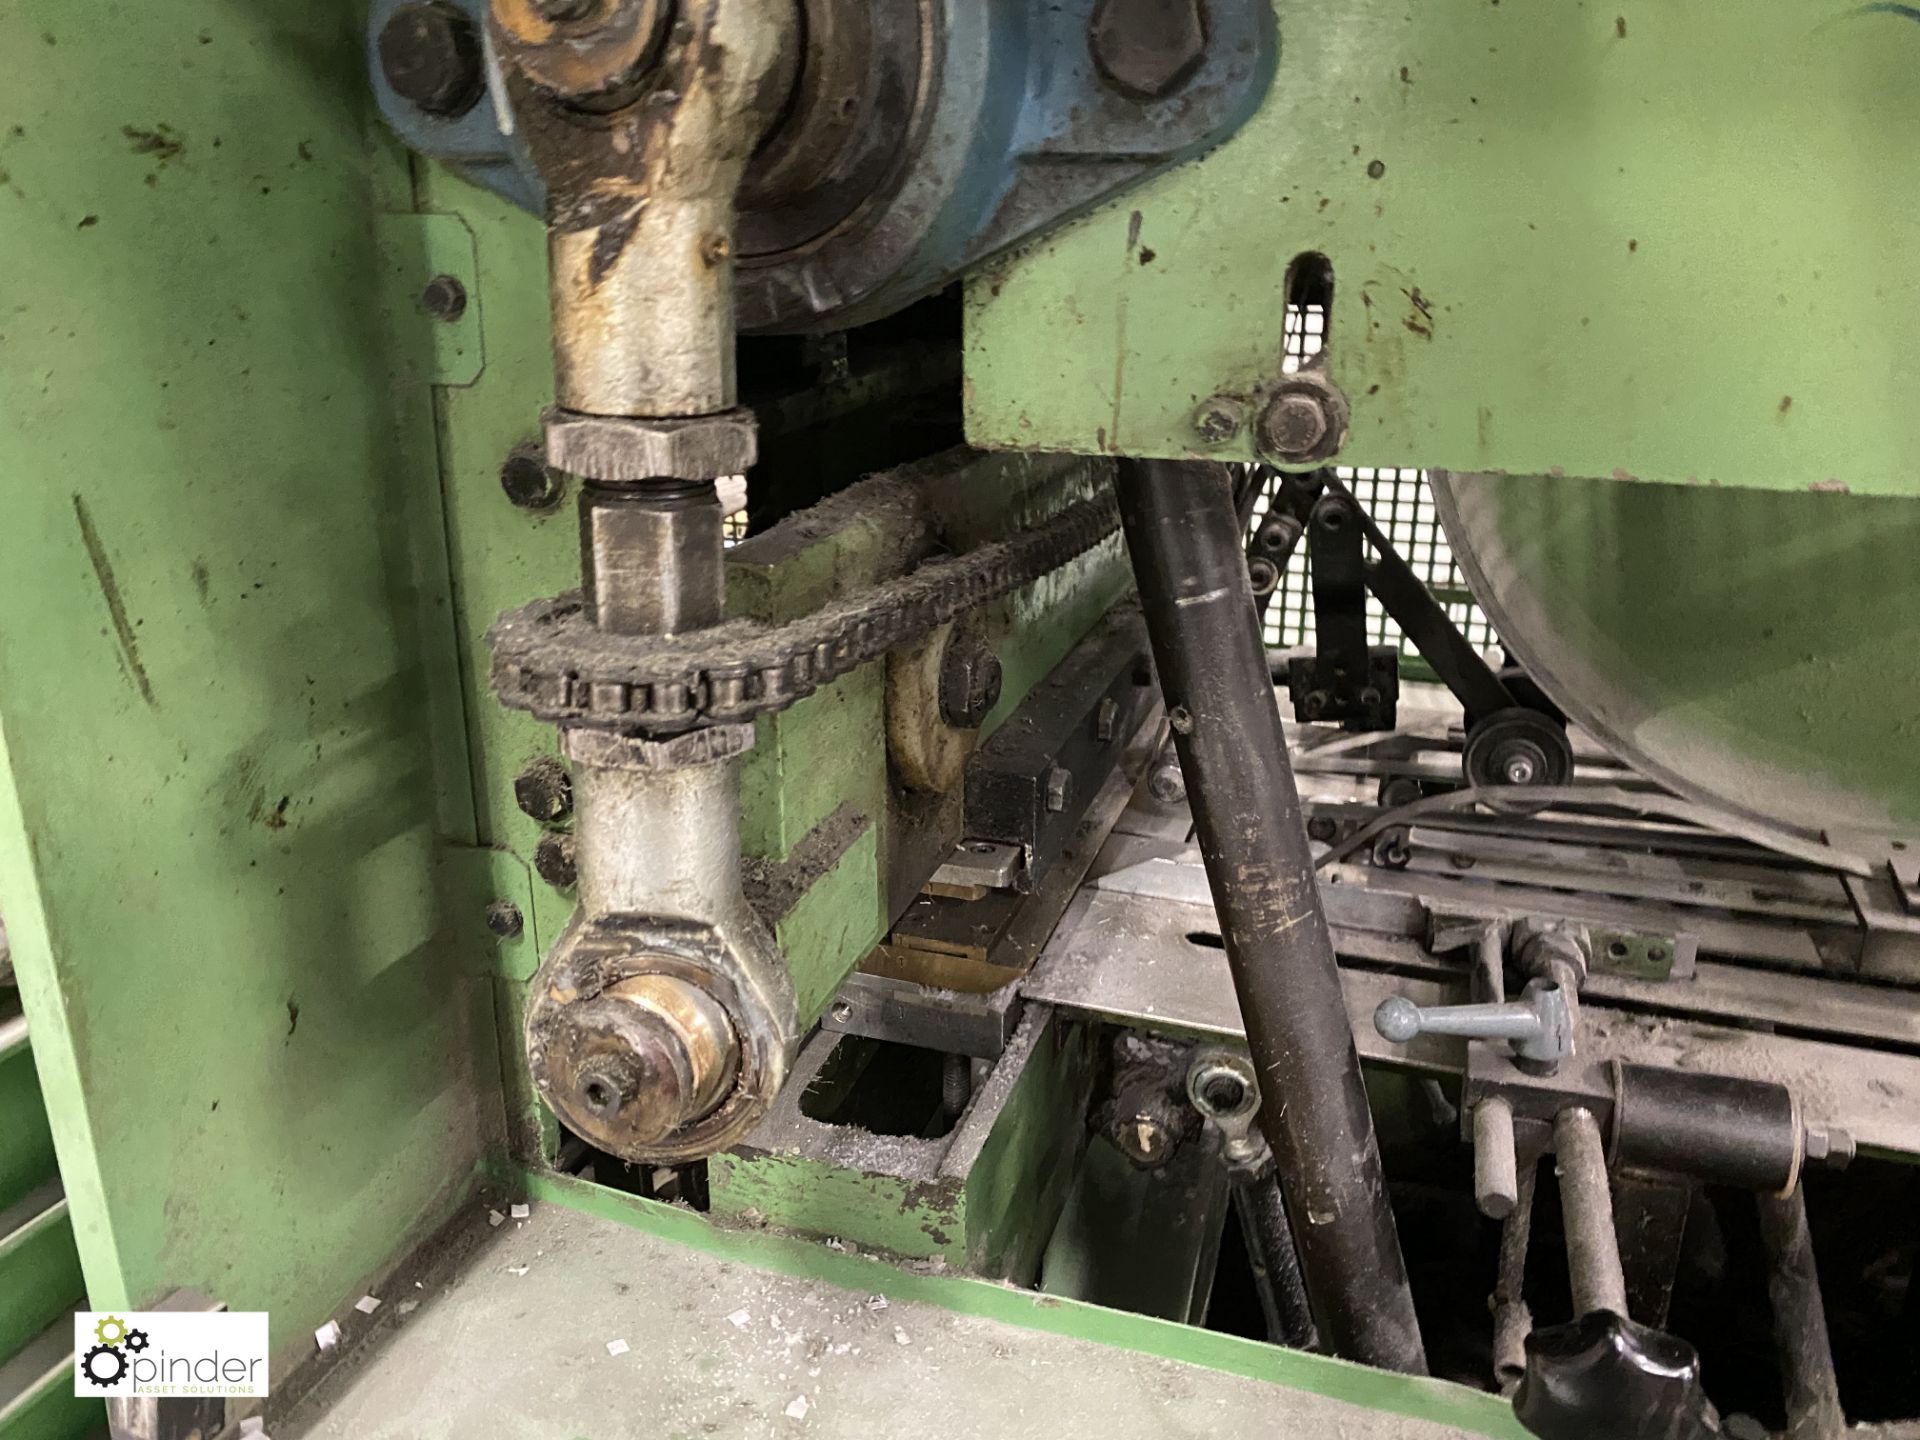 Kugler 340-1 automated high speed Hole Punch, serial number 496-340 (located a separate Wakefield - Image 11 of 11